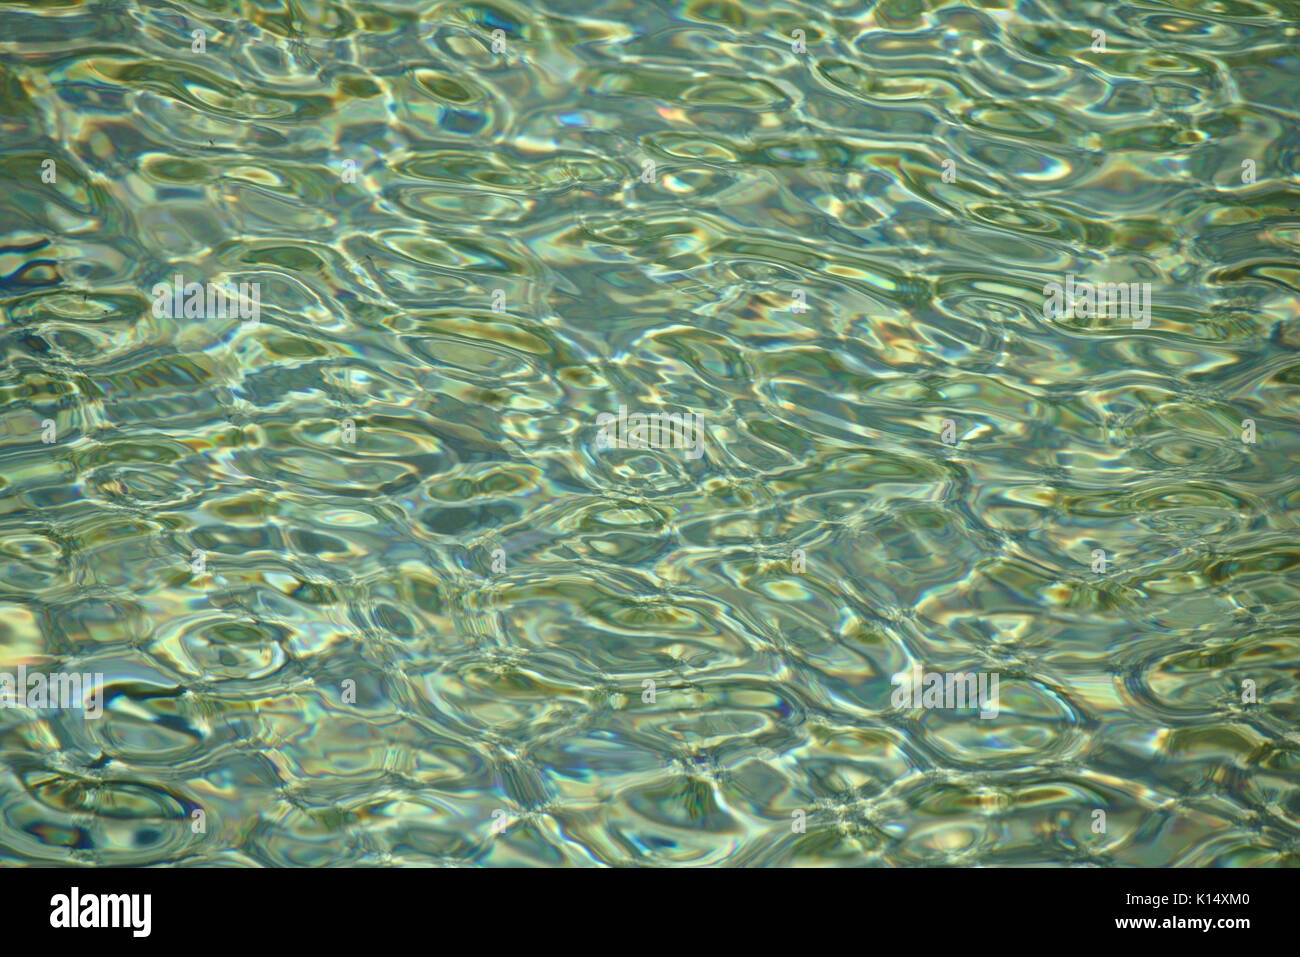 Rippling water surface with bright reflections of sunlight Stock Photo